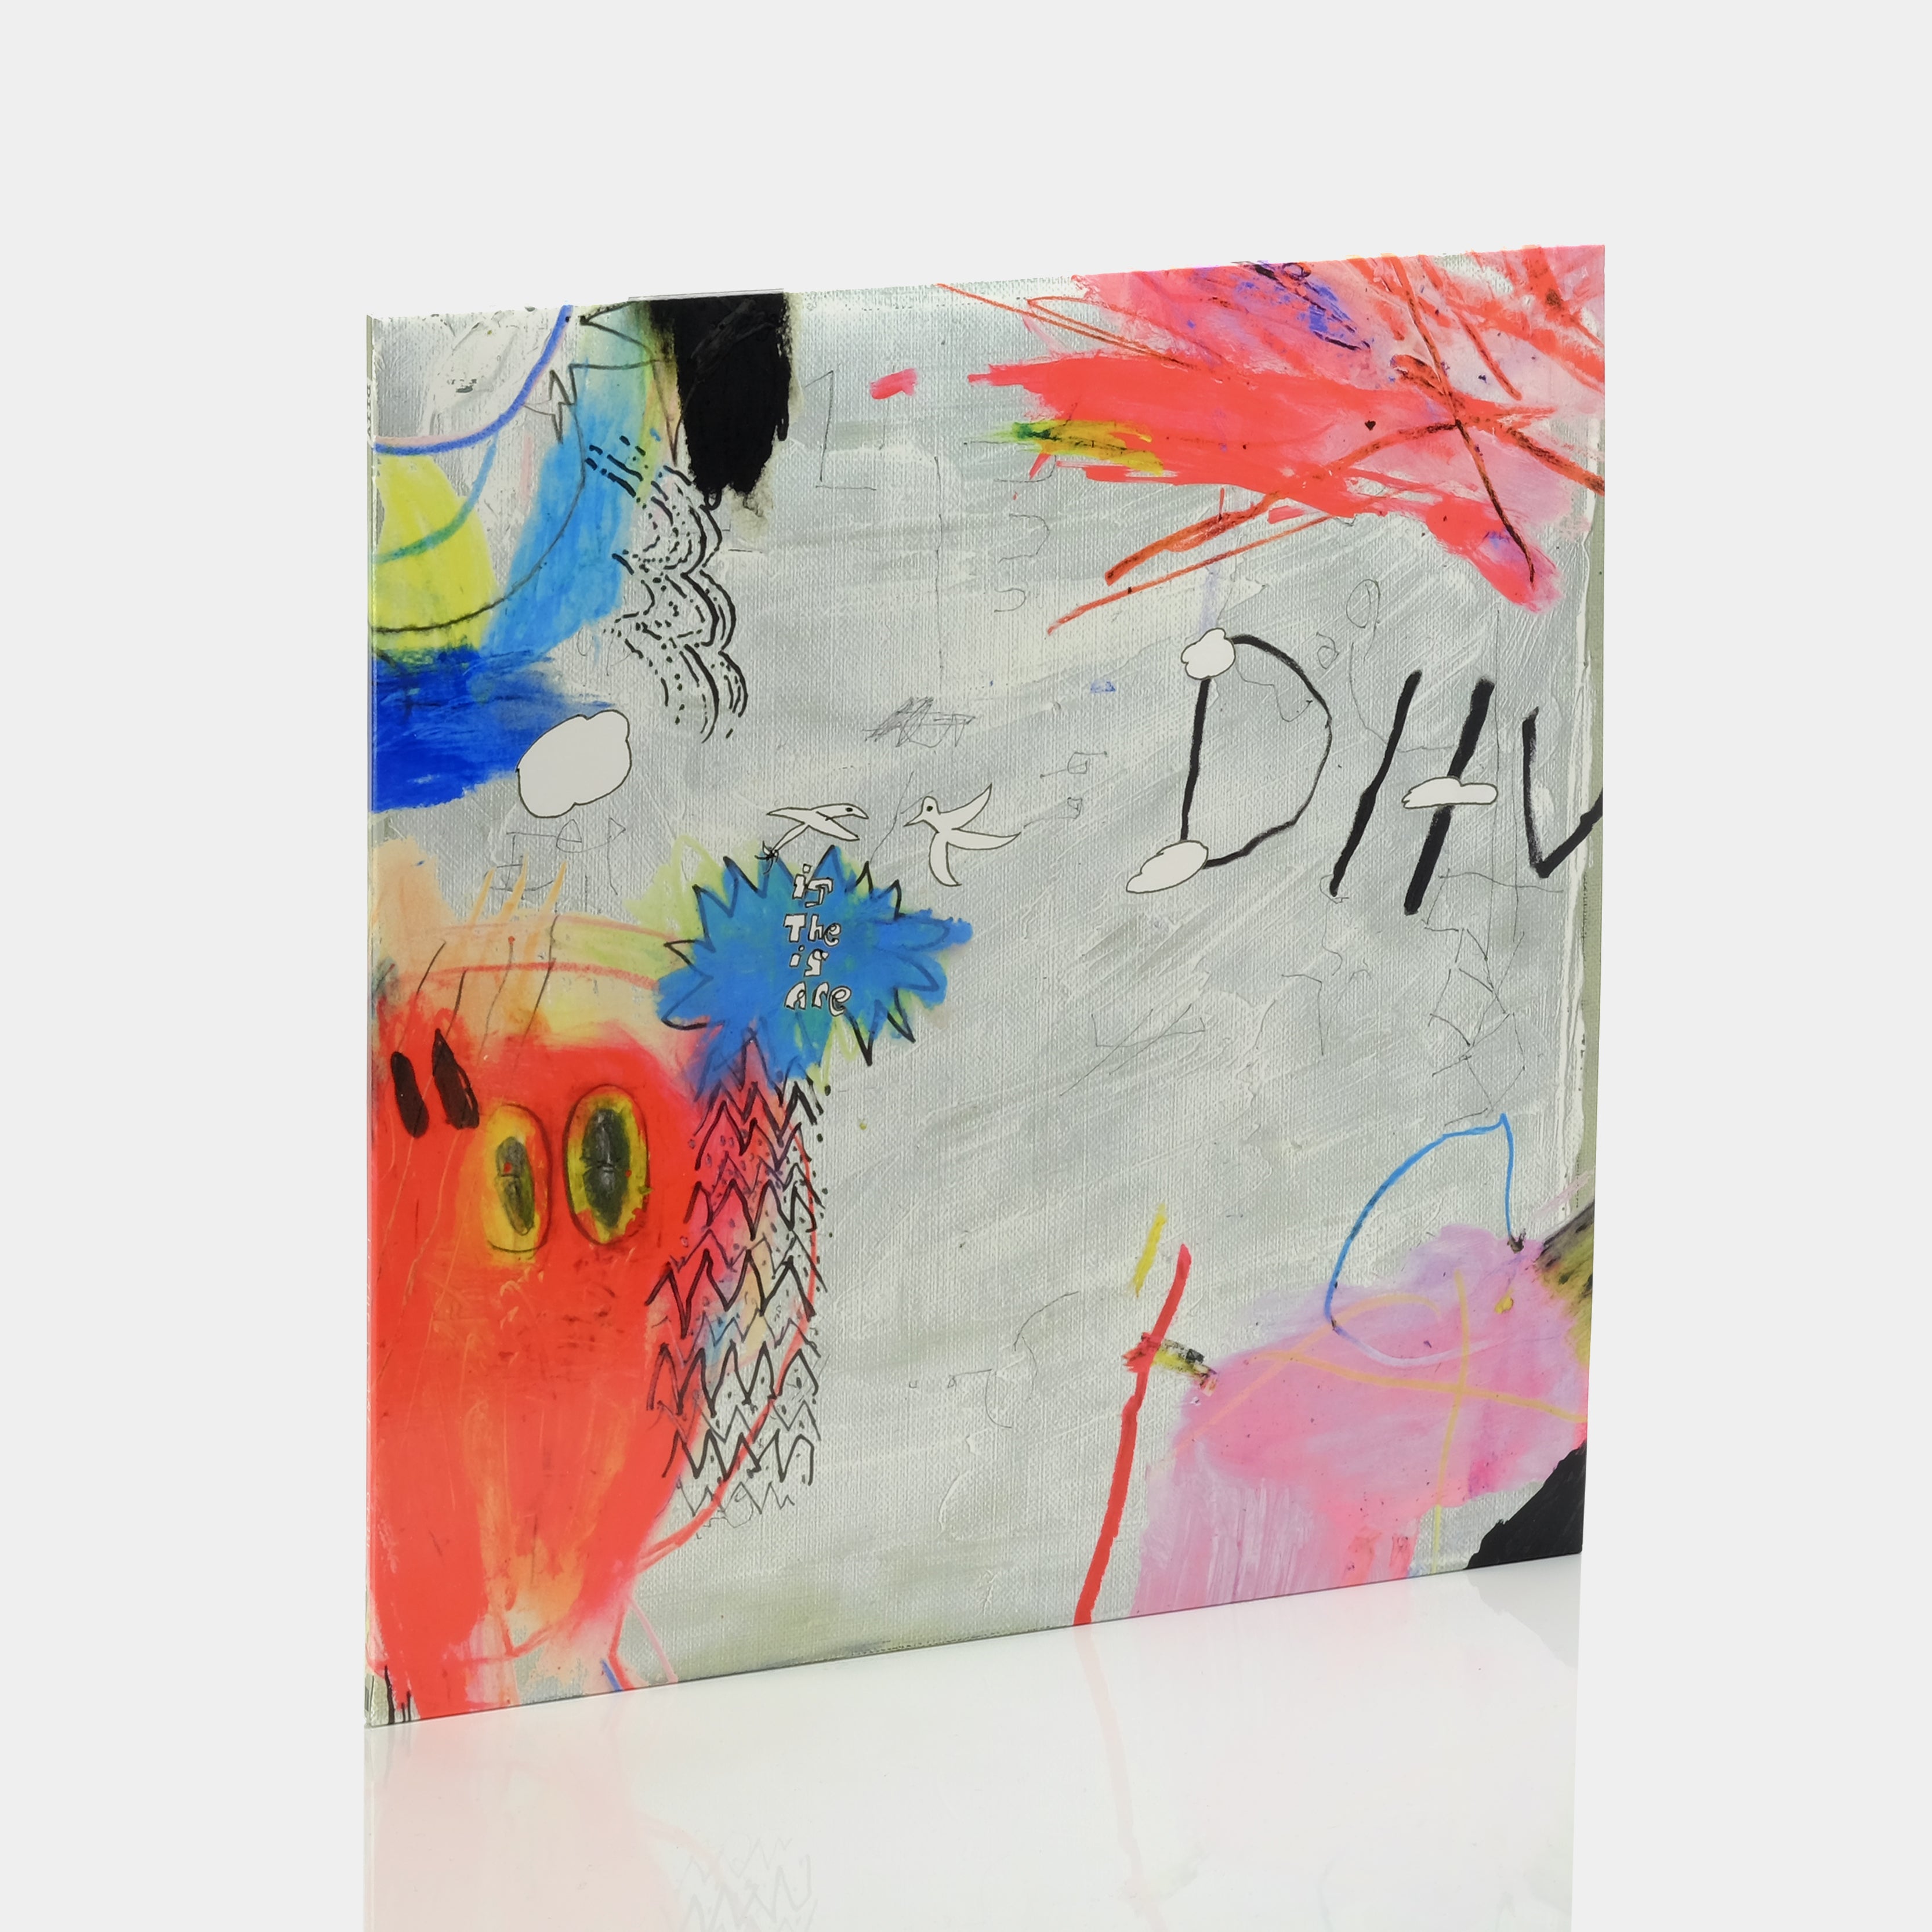 DIIV - Is The Is Are 2xLP Vinyl Record